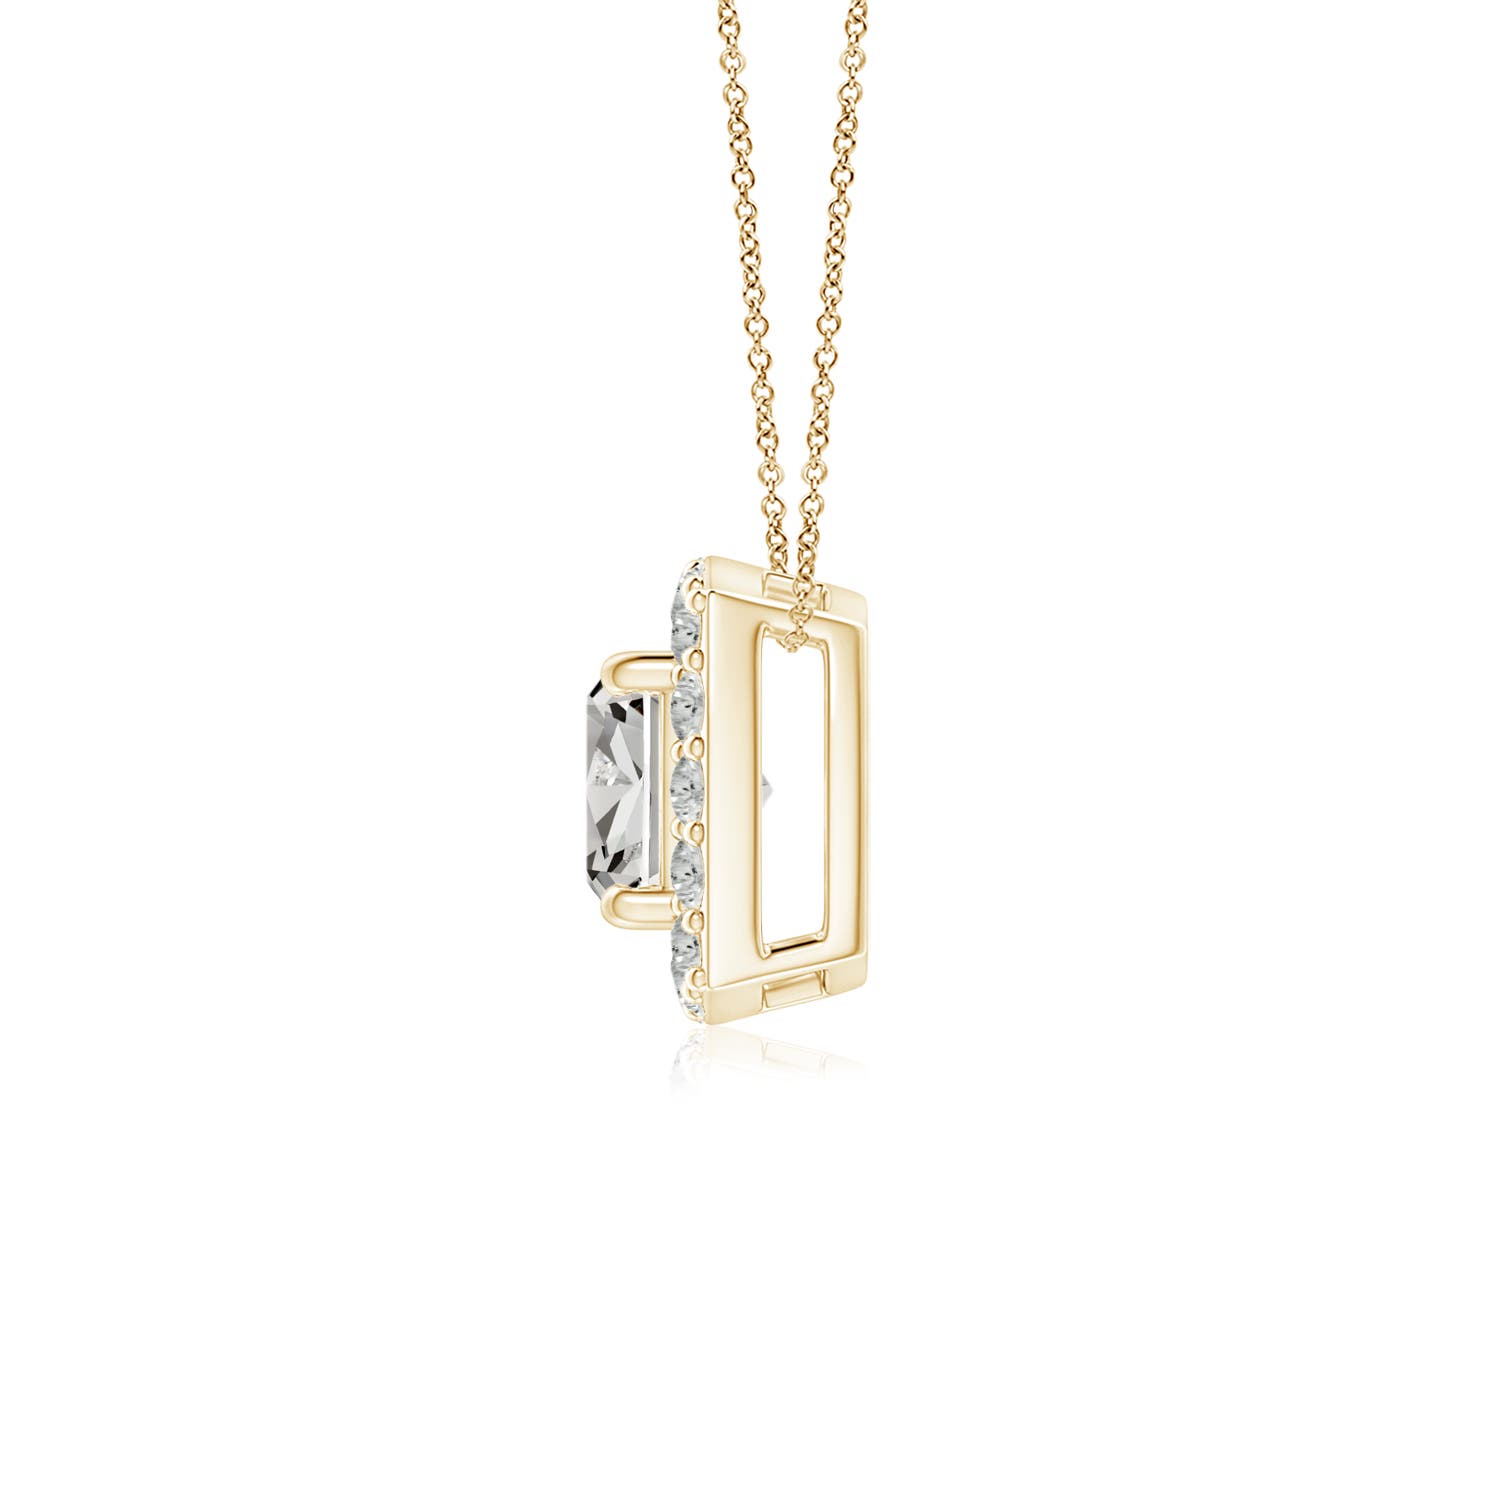 K, I3 / 0.36 CT / 14 KT Yellow Gold